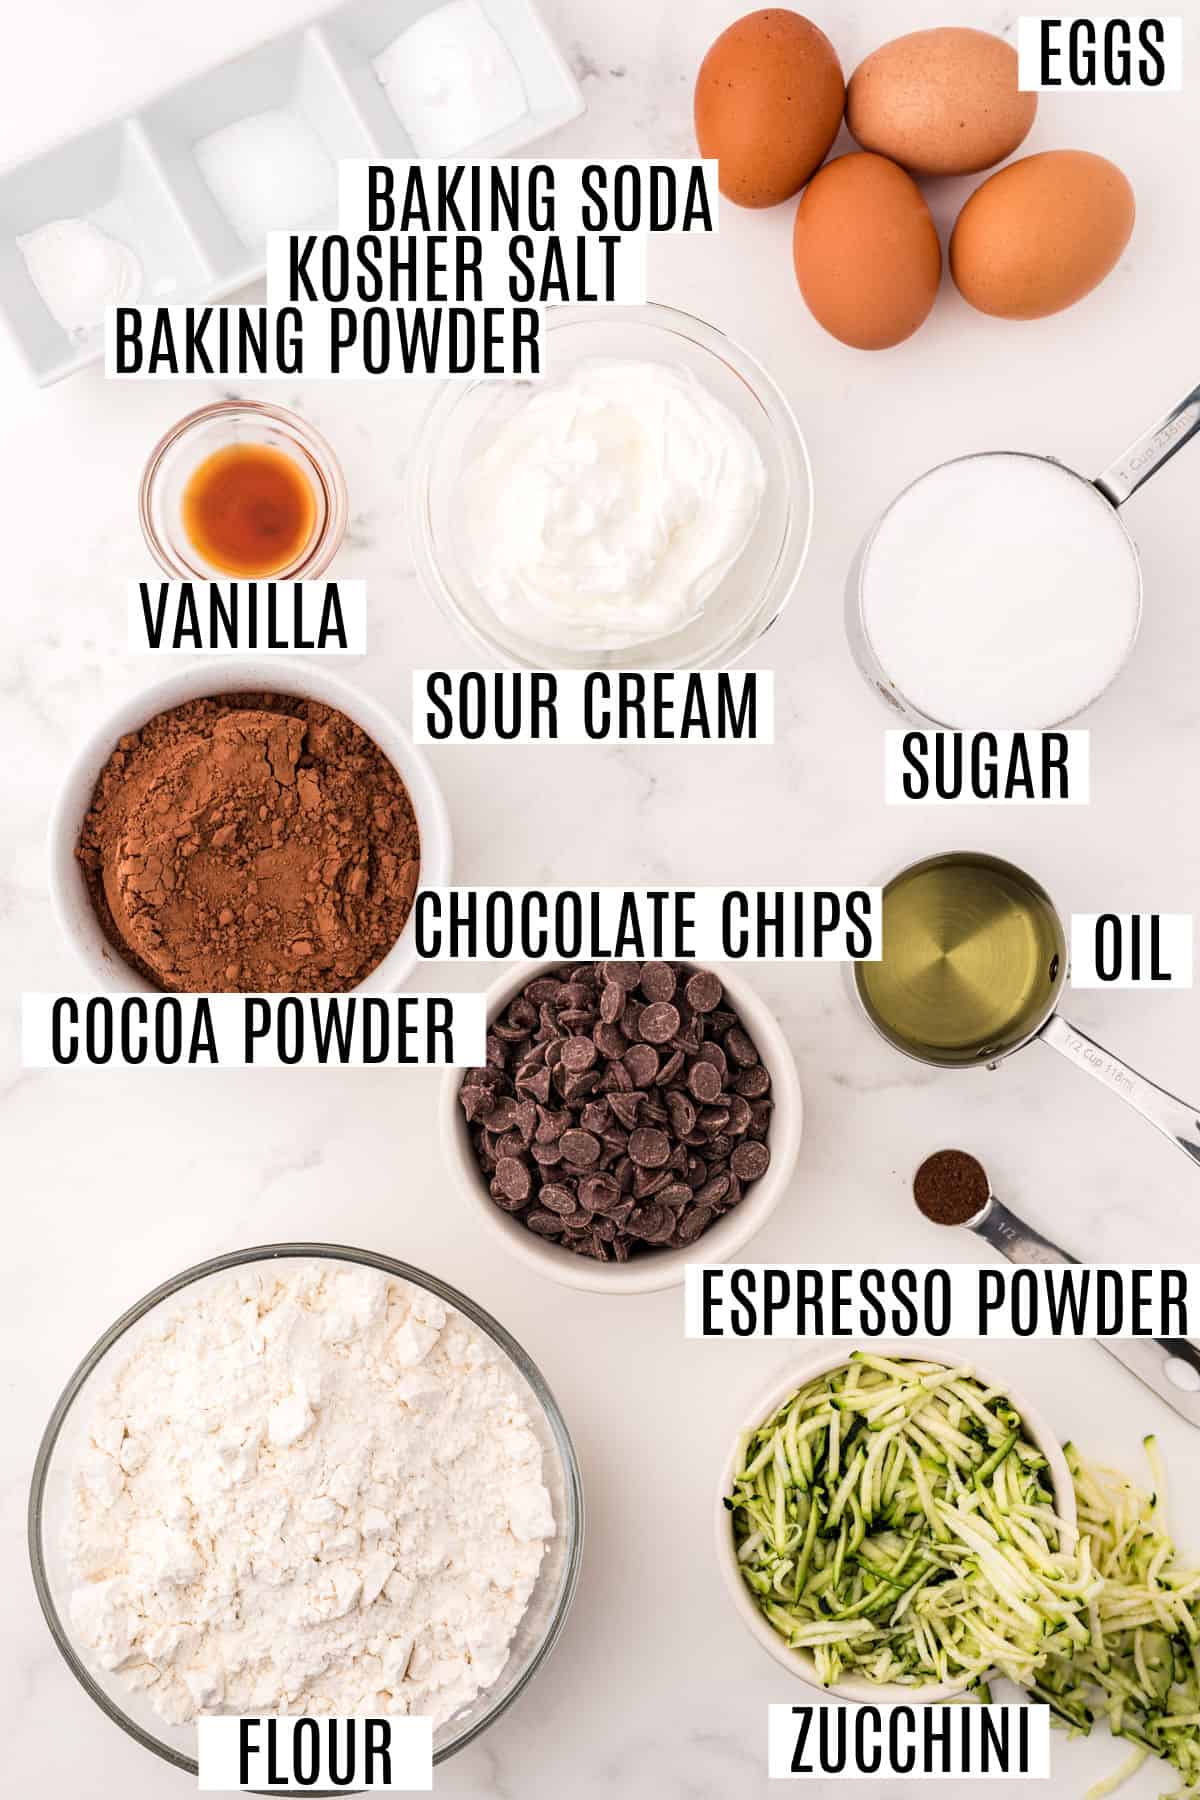 Ingredients needed for double chocolate zucchini bread.